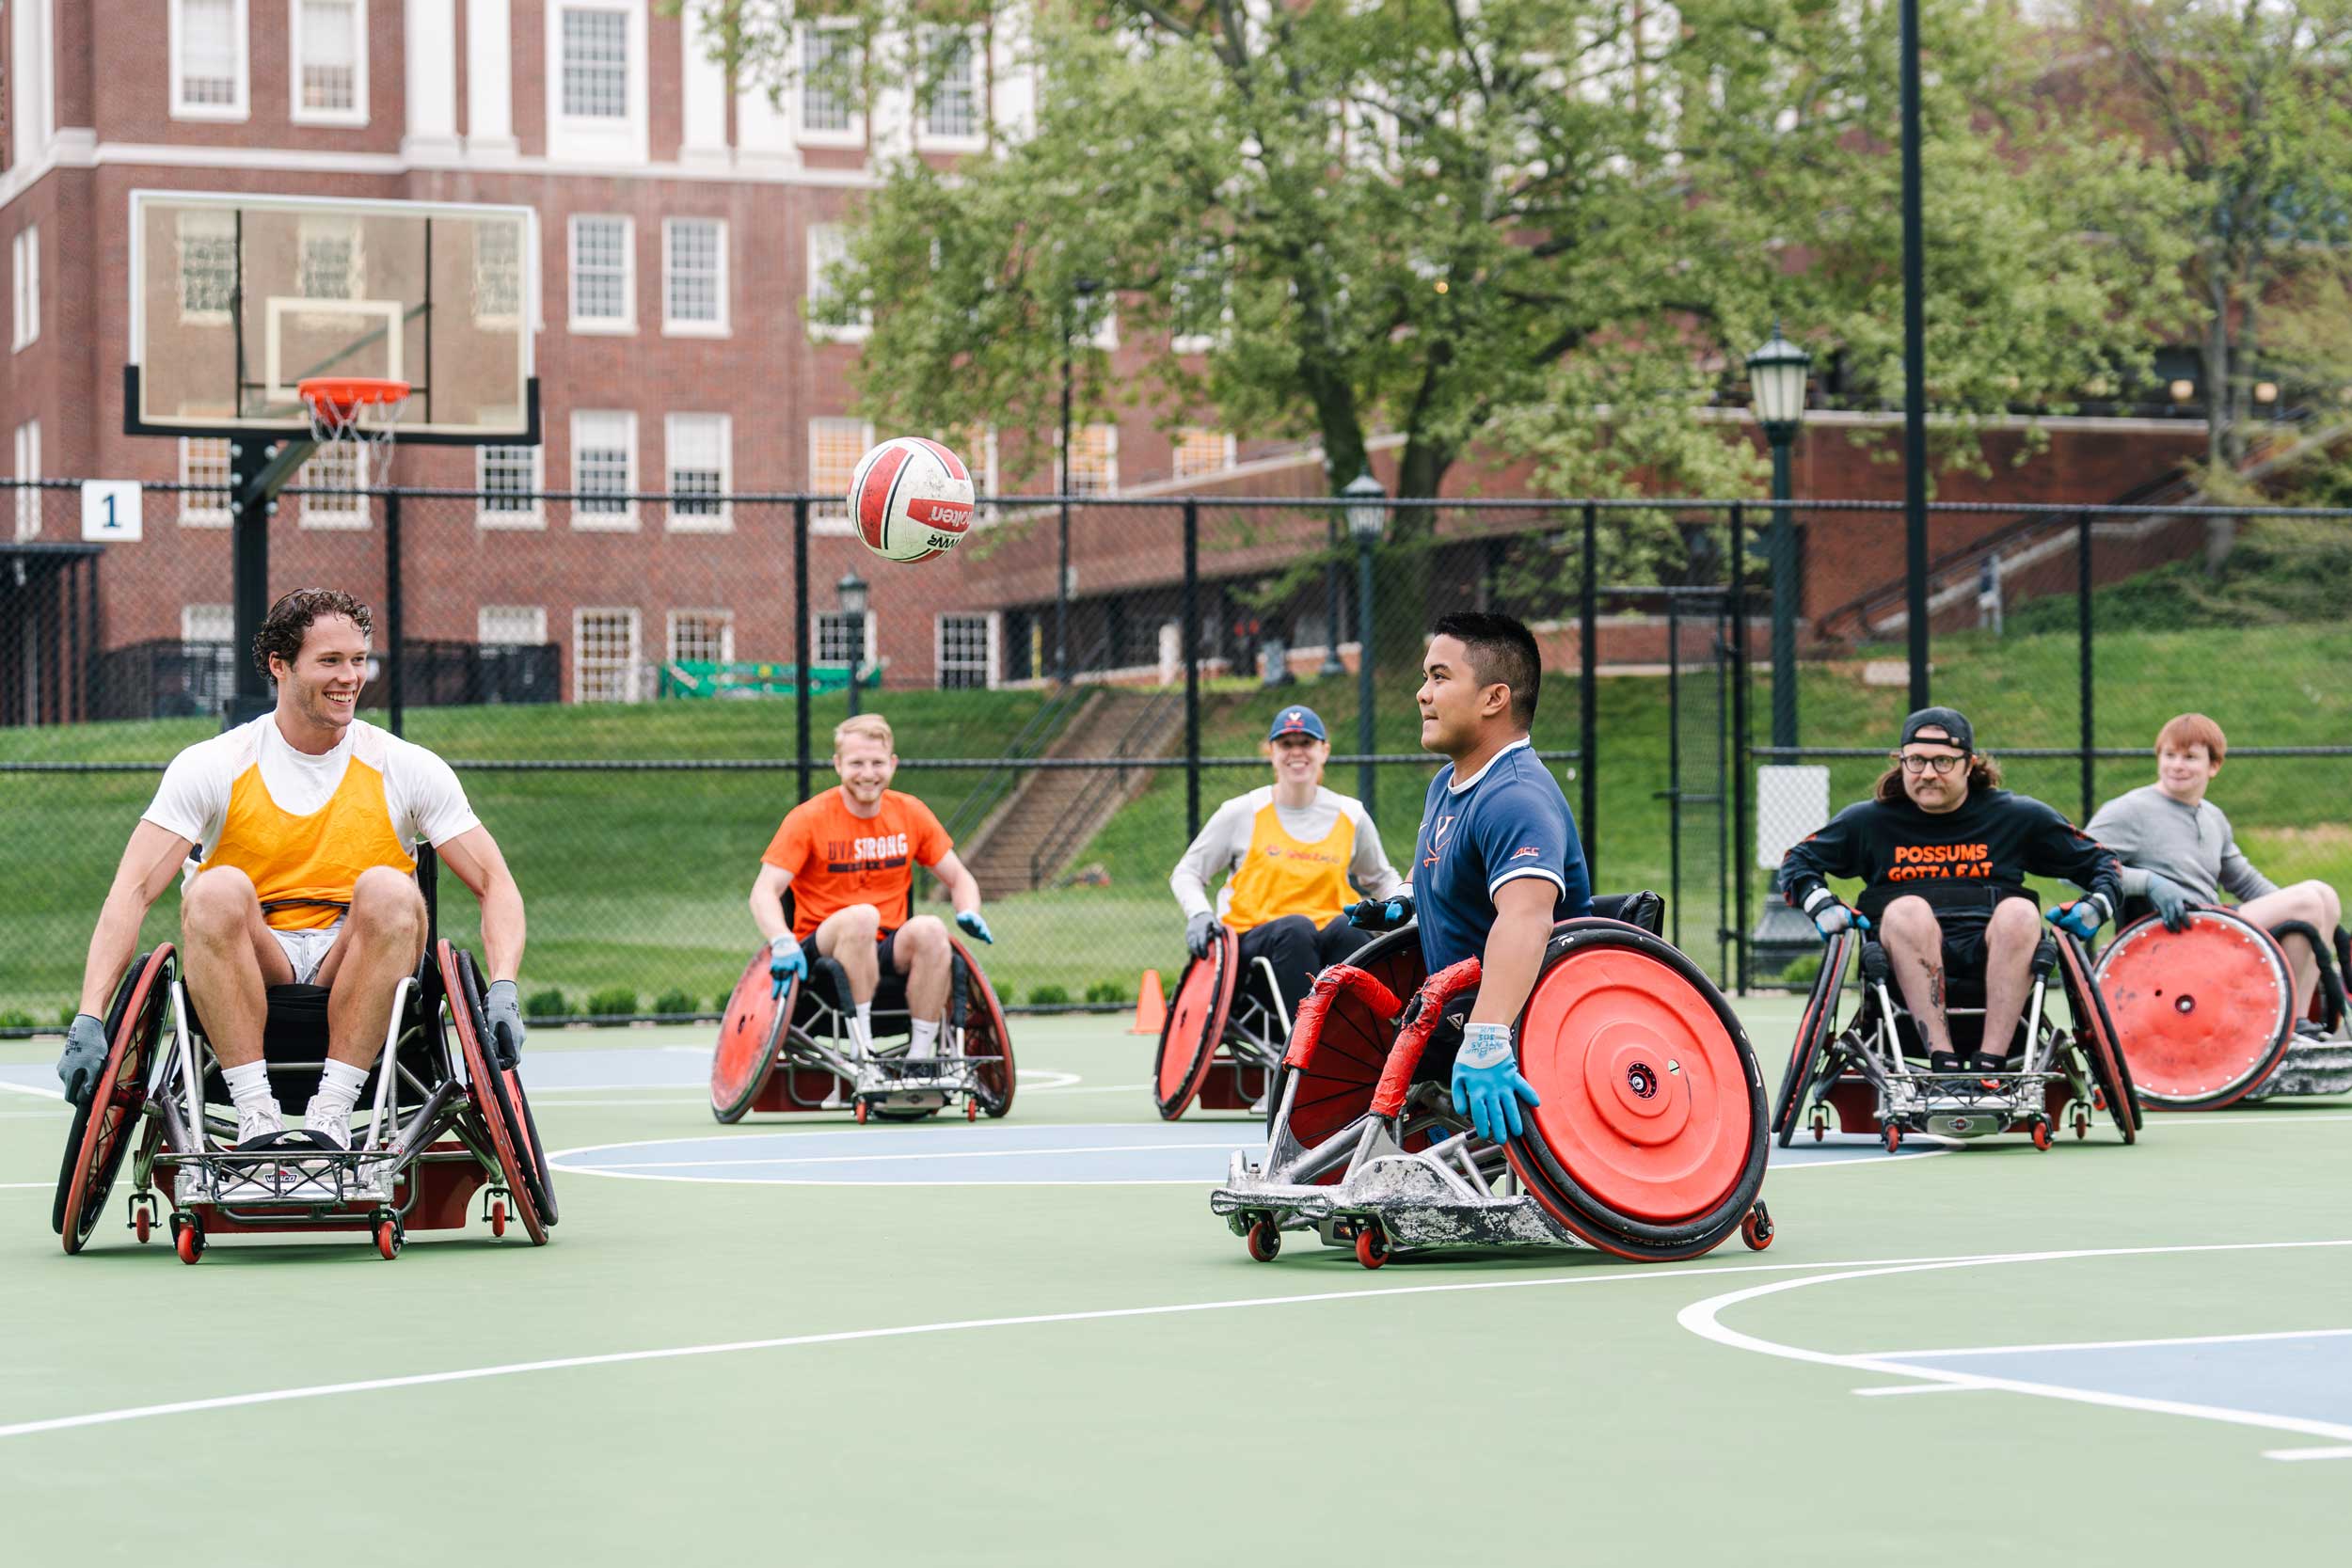 Event Highlights Adaptive Sports Before Paralympics